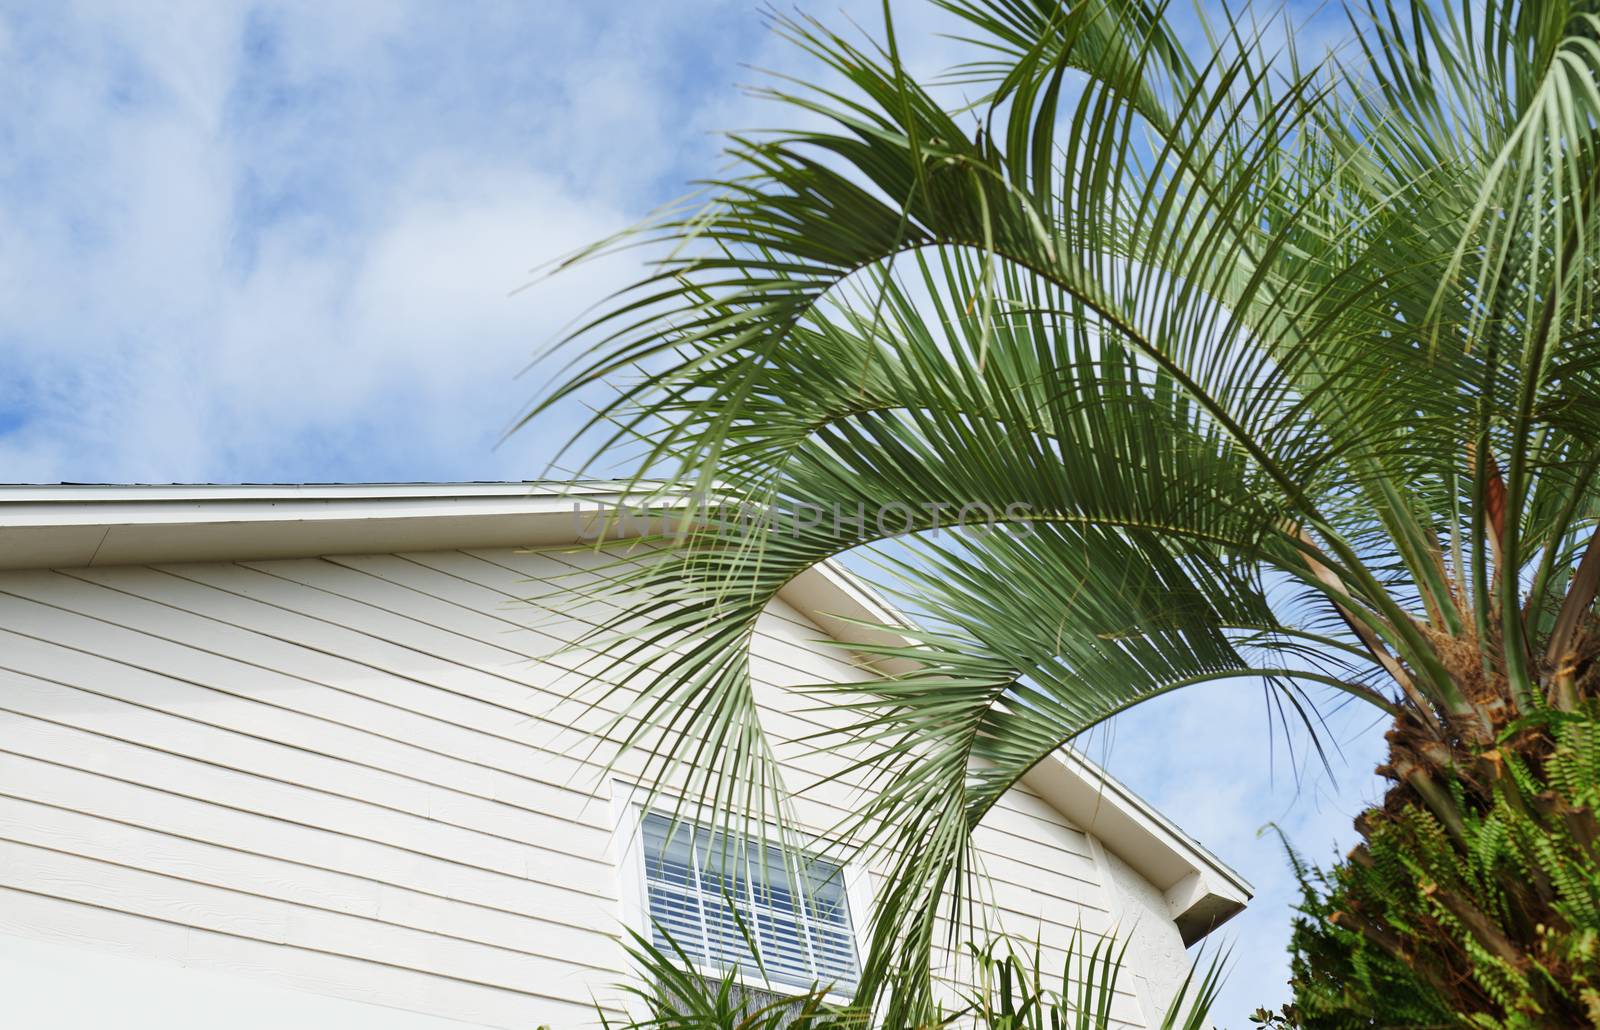 Residential building and palm tree at the backyard